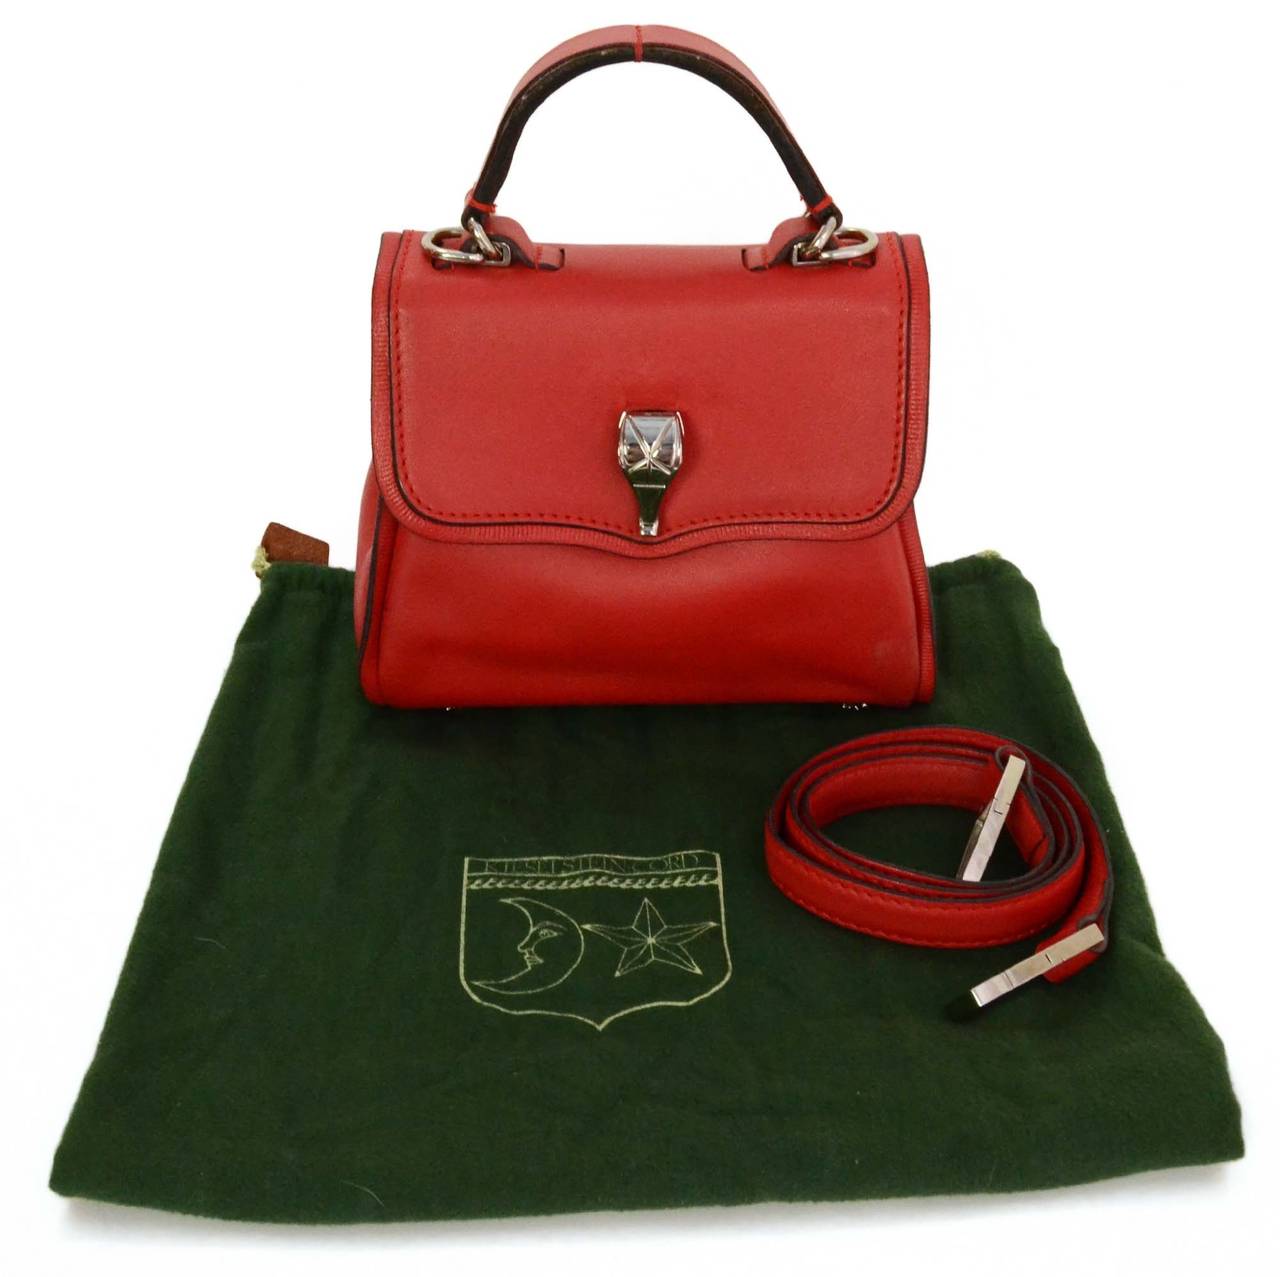 KIESELSTEIN-CORD Red Leather Small Satchel Bag SHW 4